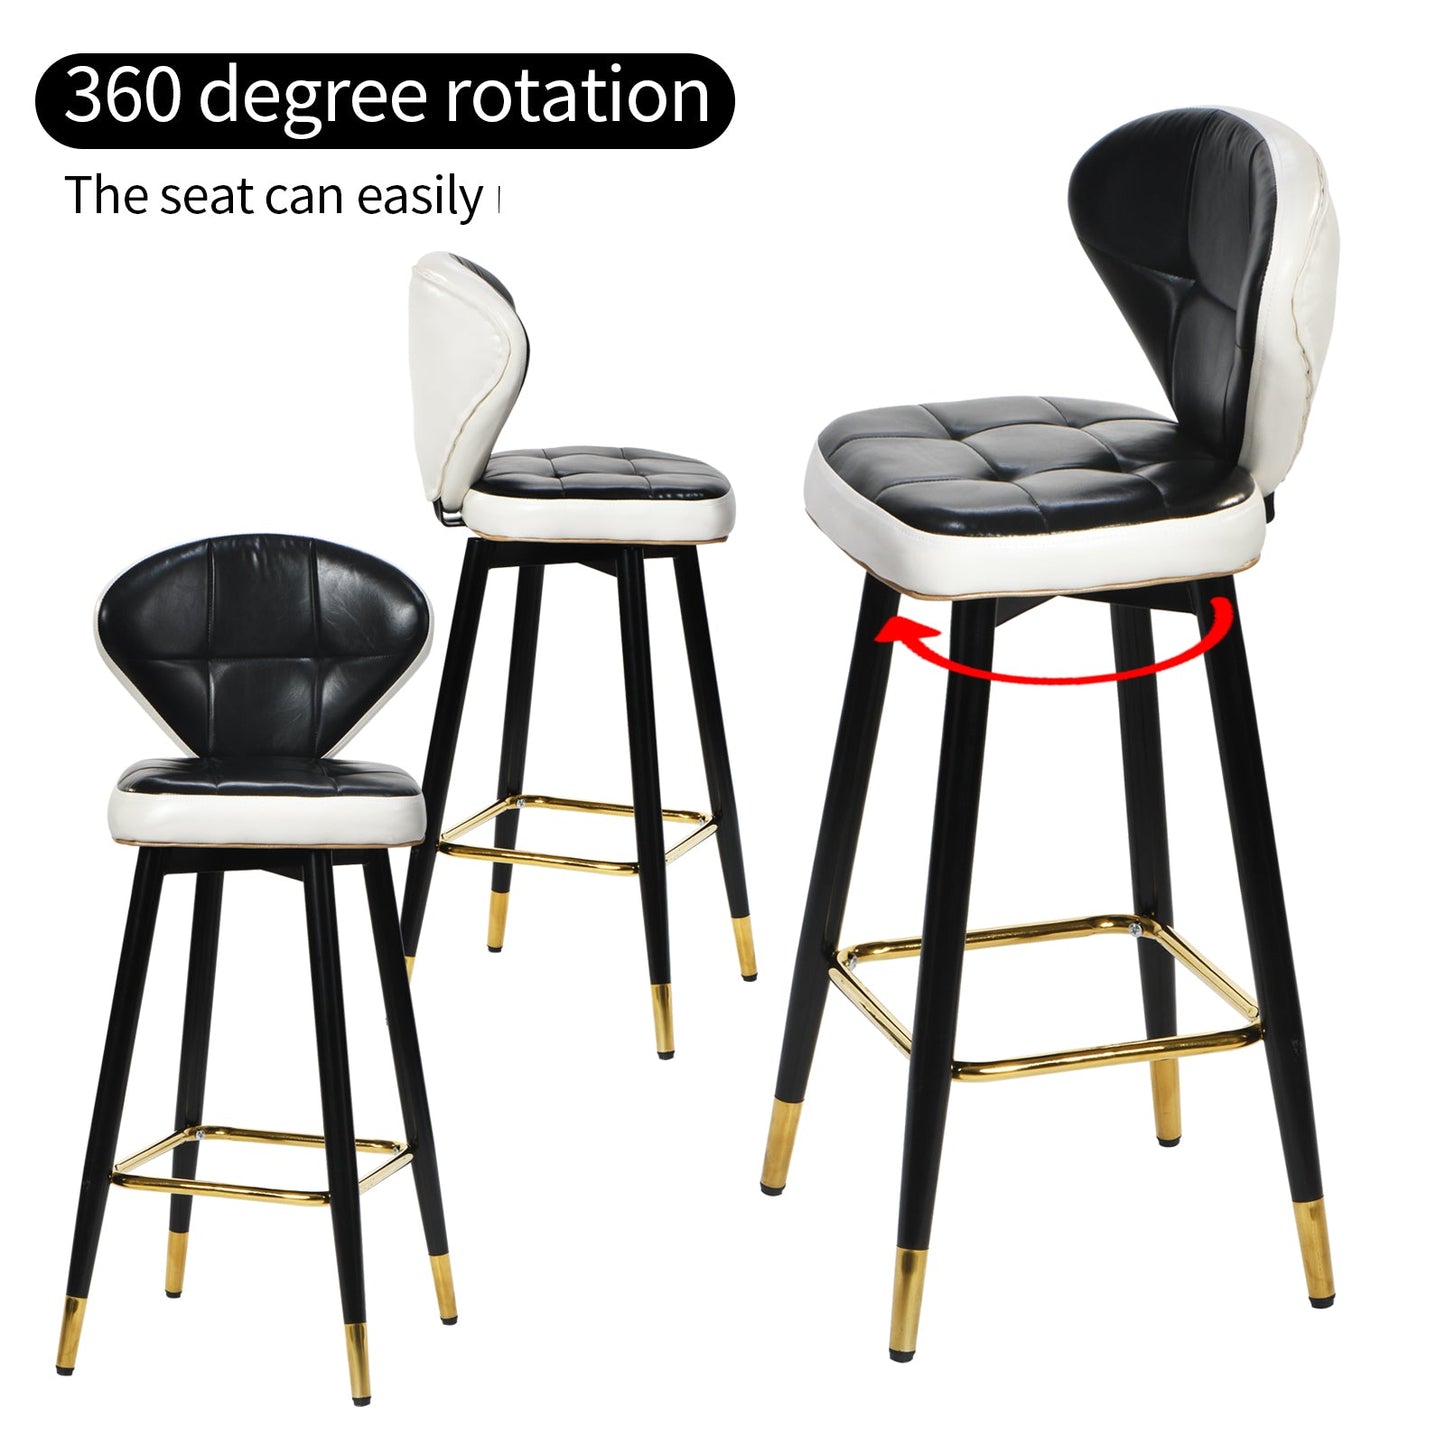 Leather Bar Stool 360 Rotating Bar Stool with Backrest and Foot Pedals for Bars, Kitchen, Dining Room,  Bar Stool Set of 2